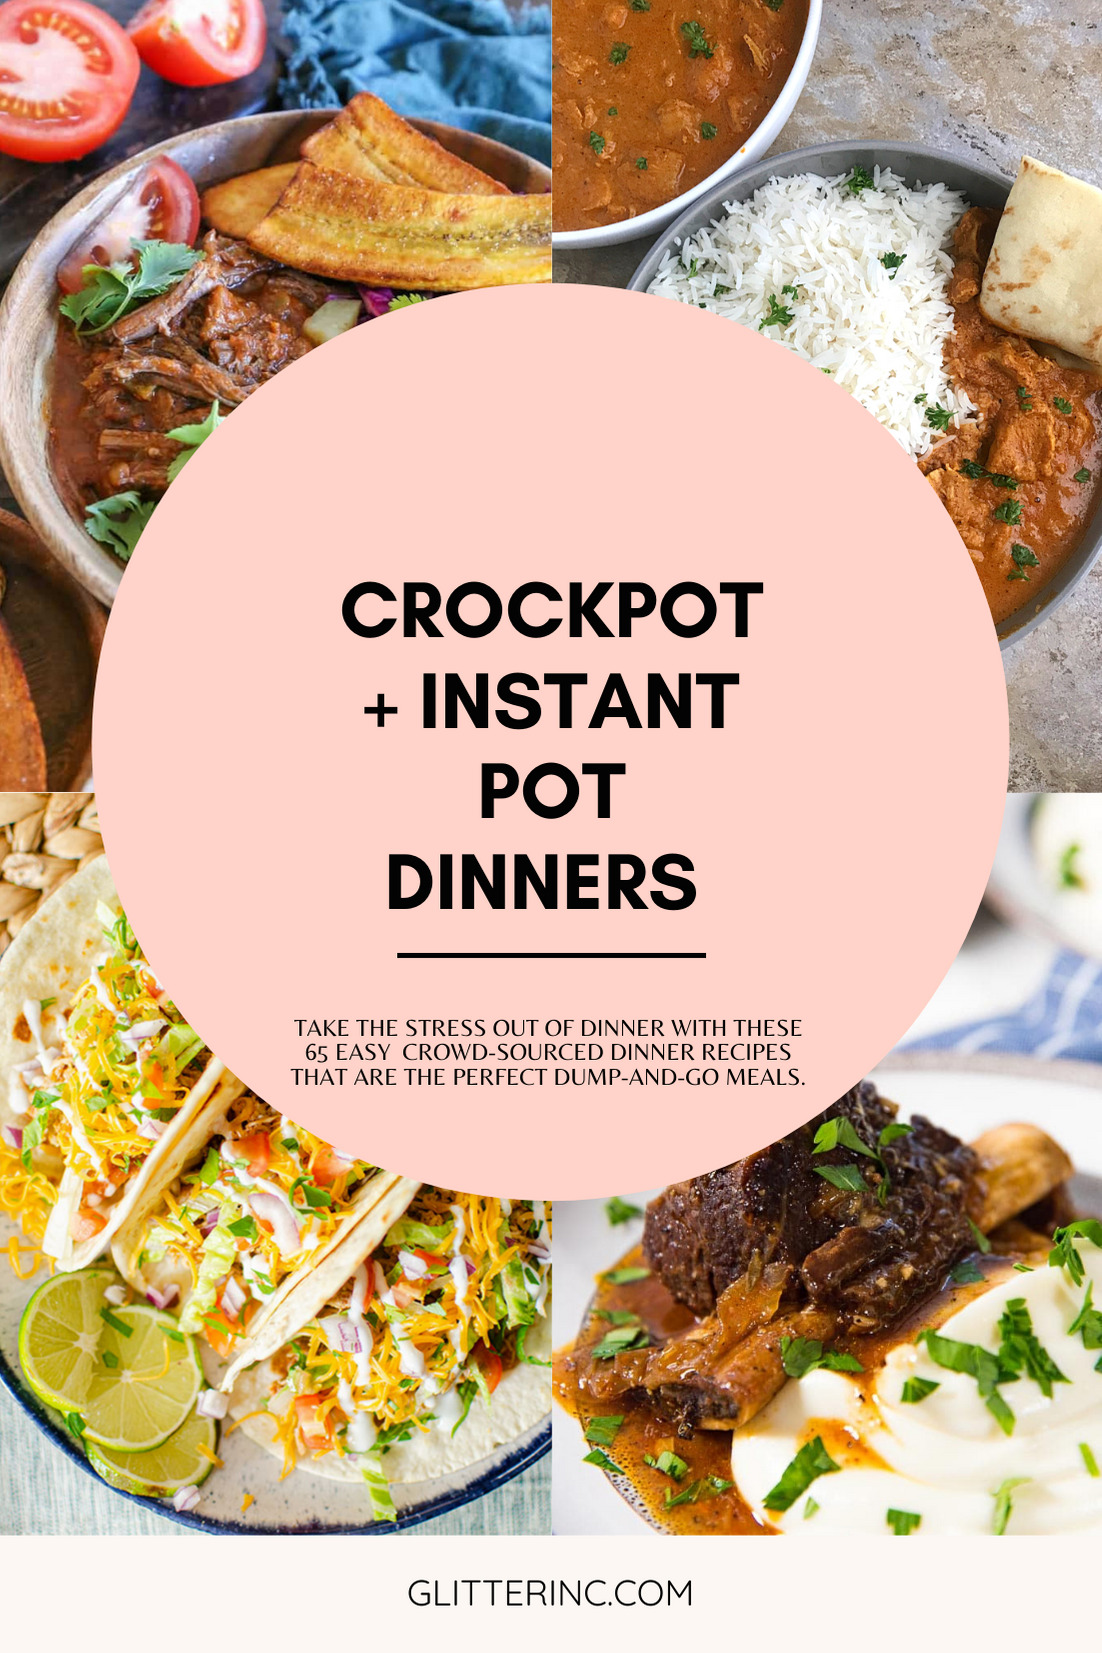 Instant Pot and Crockpot or Slow Cooker recipes are stress-free dinners at their finest; these 65 easy dinner recipes are the perfect dump-and-go meals. | @glitterinclexi | GLITTERINC.COM